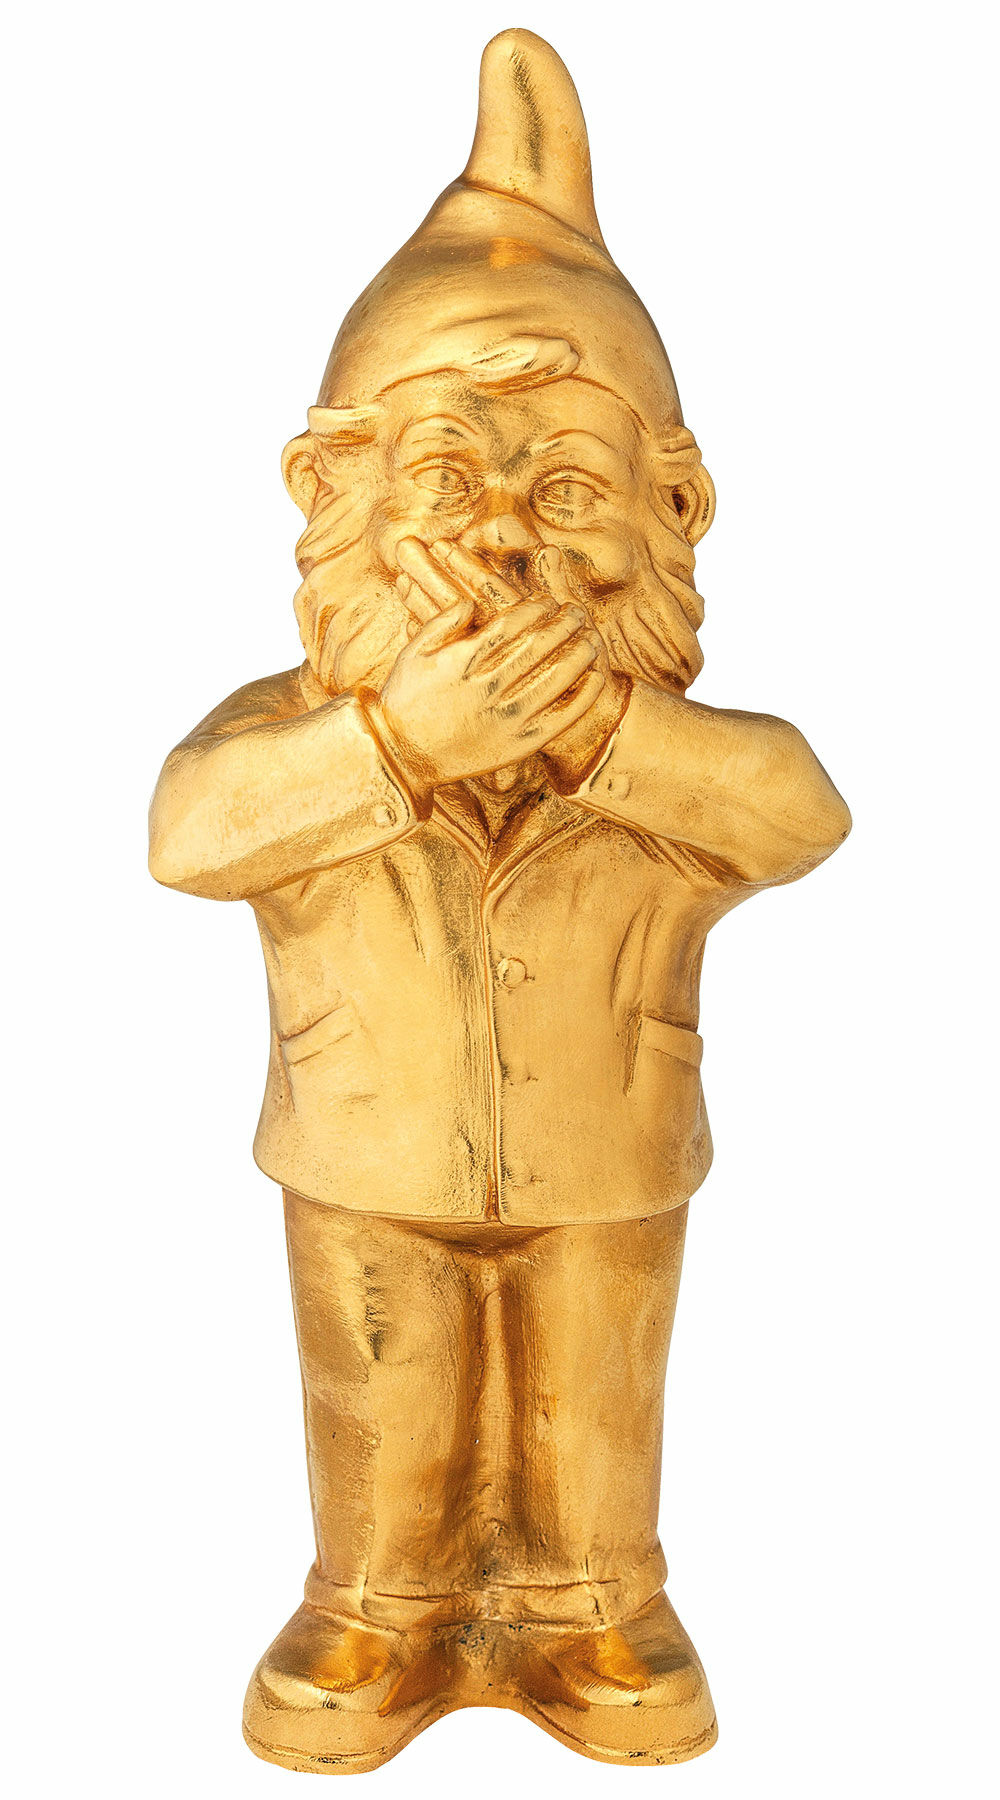 Sculpture "Bearer of Secrets - Say Nothing", gold-plated version by Ottmar Hörl